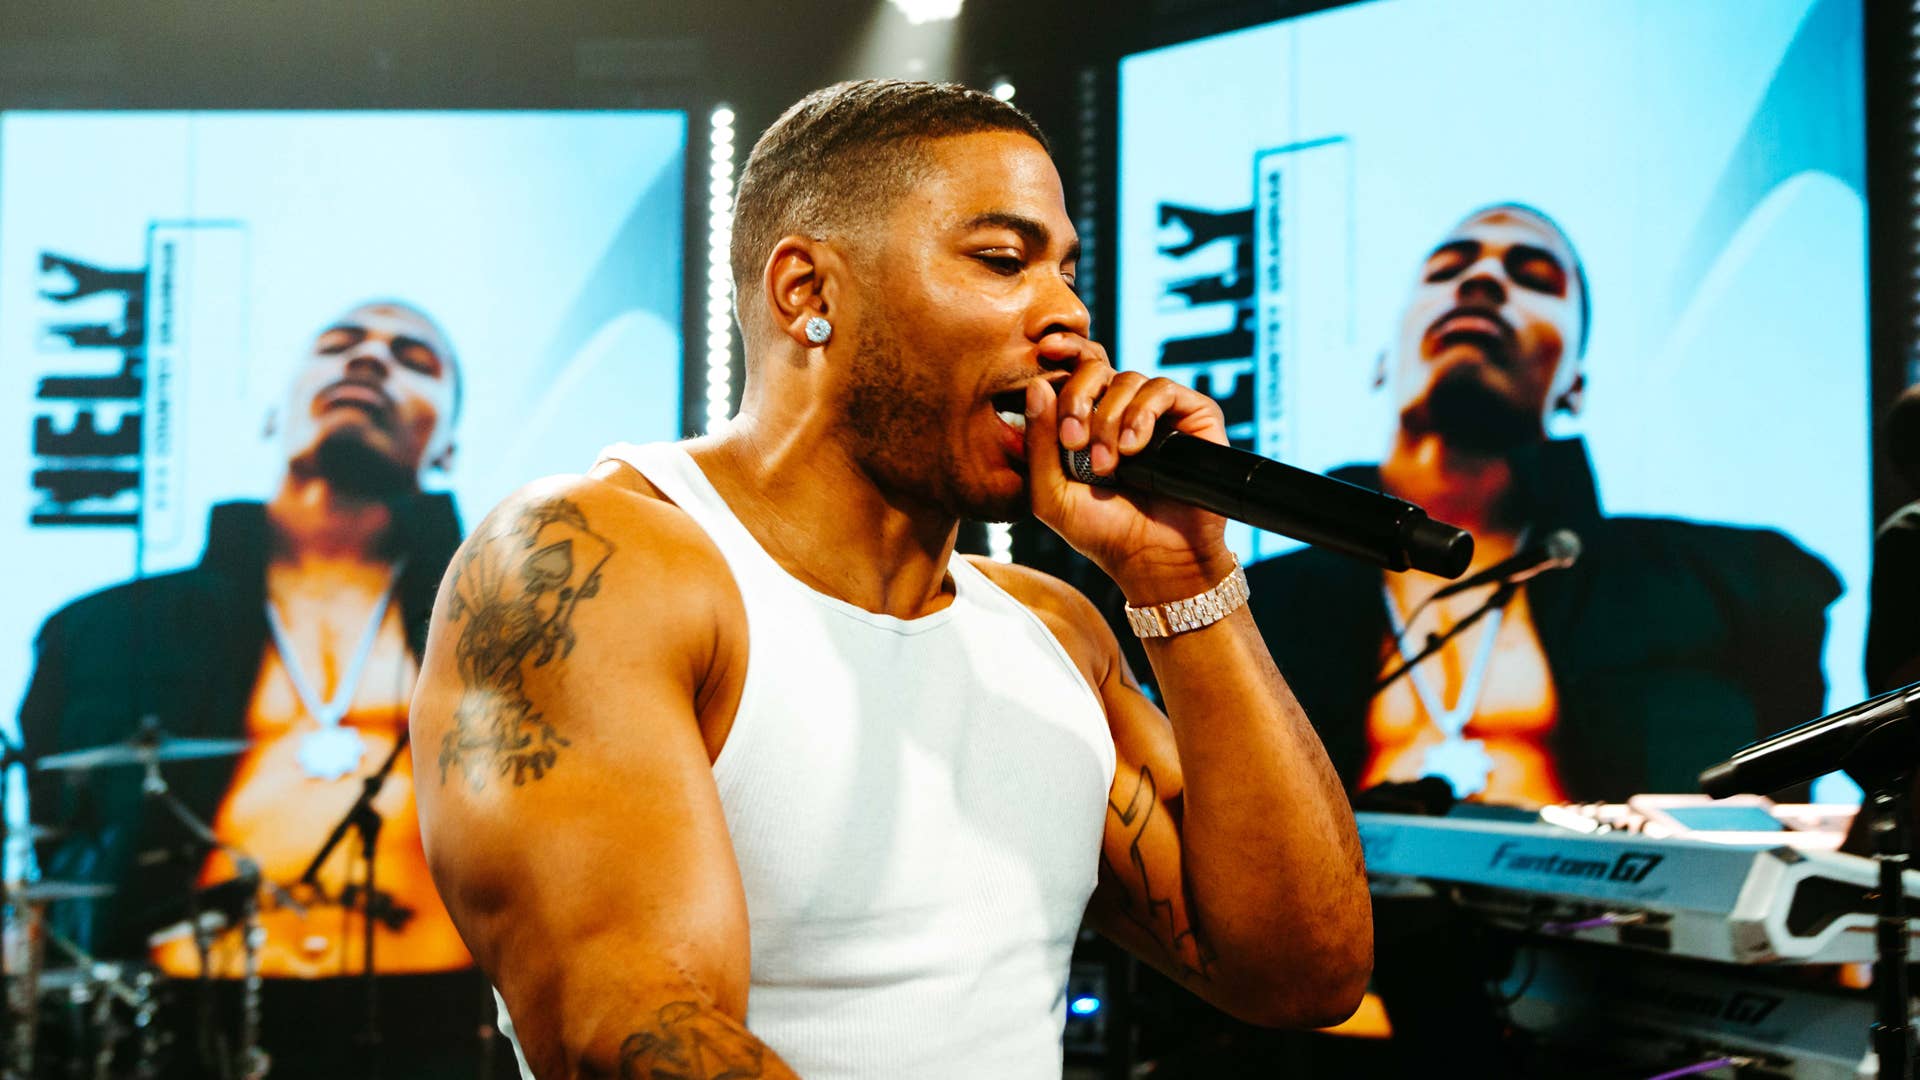 Nelly influence of his music